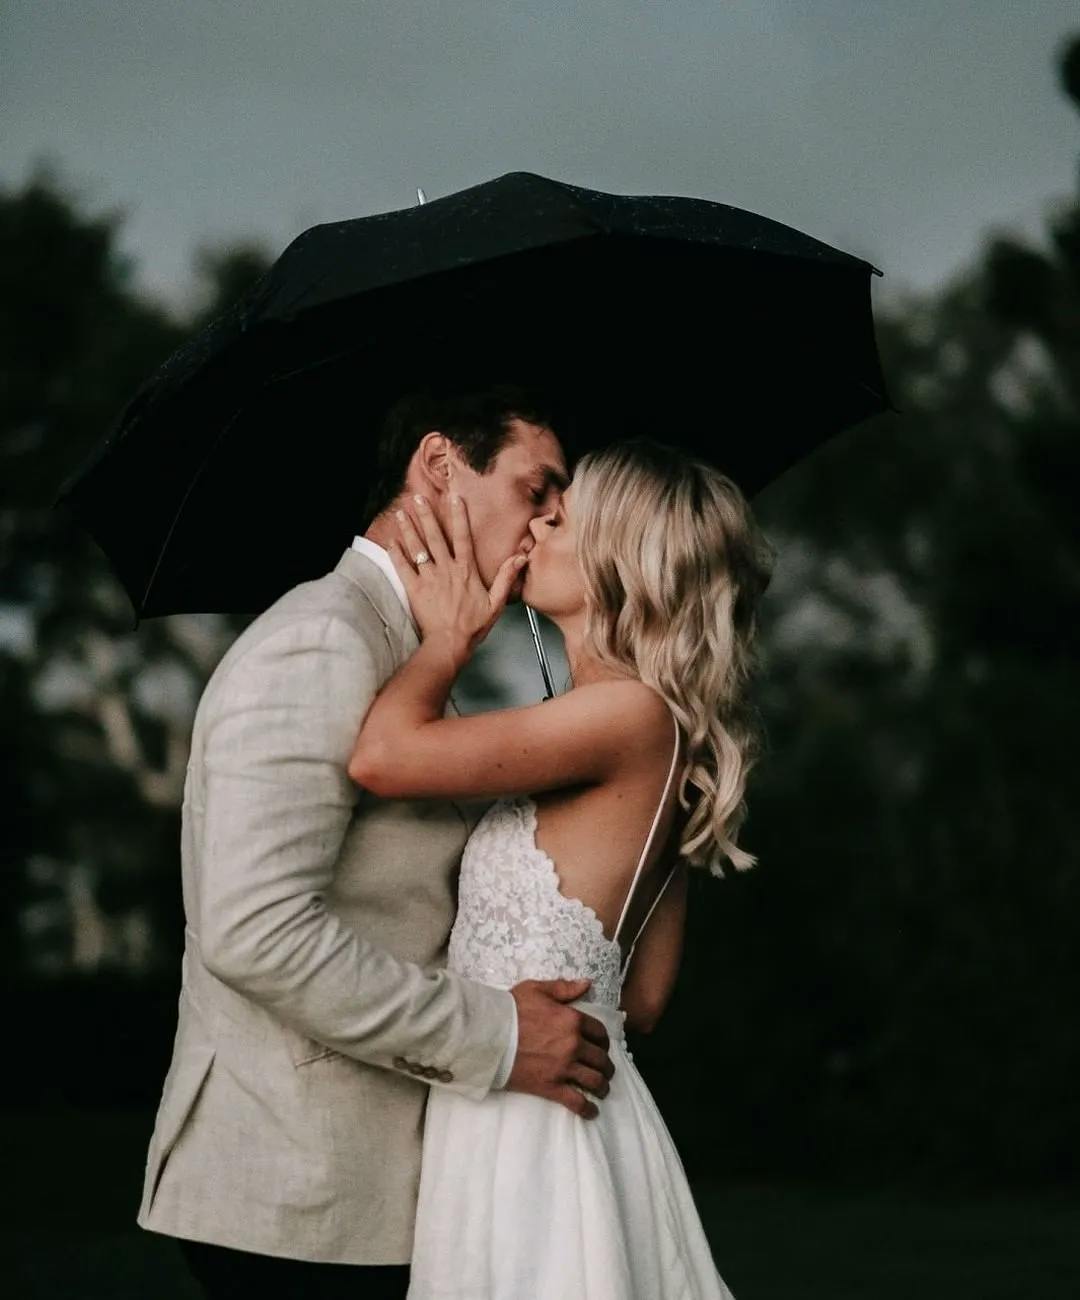 A couple dressed in wedding attire shares a kiss under a black umbrella. The groom, wearing a light-colored suit, gently holds the bride, who is in a white lace dress. The scene is set outdoors with a dark, cloudy sky and blurred greenery in the background.